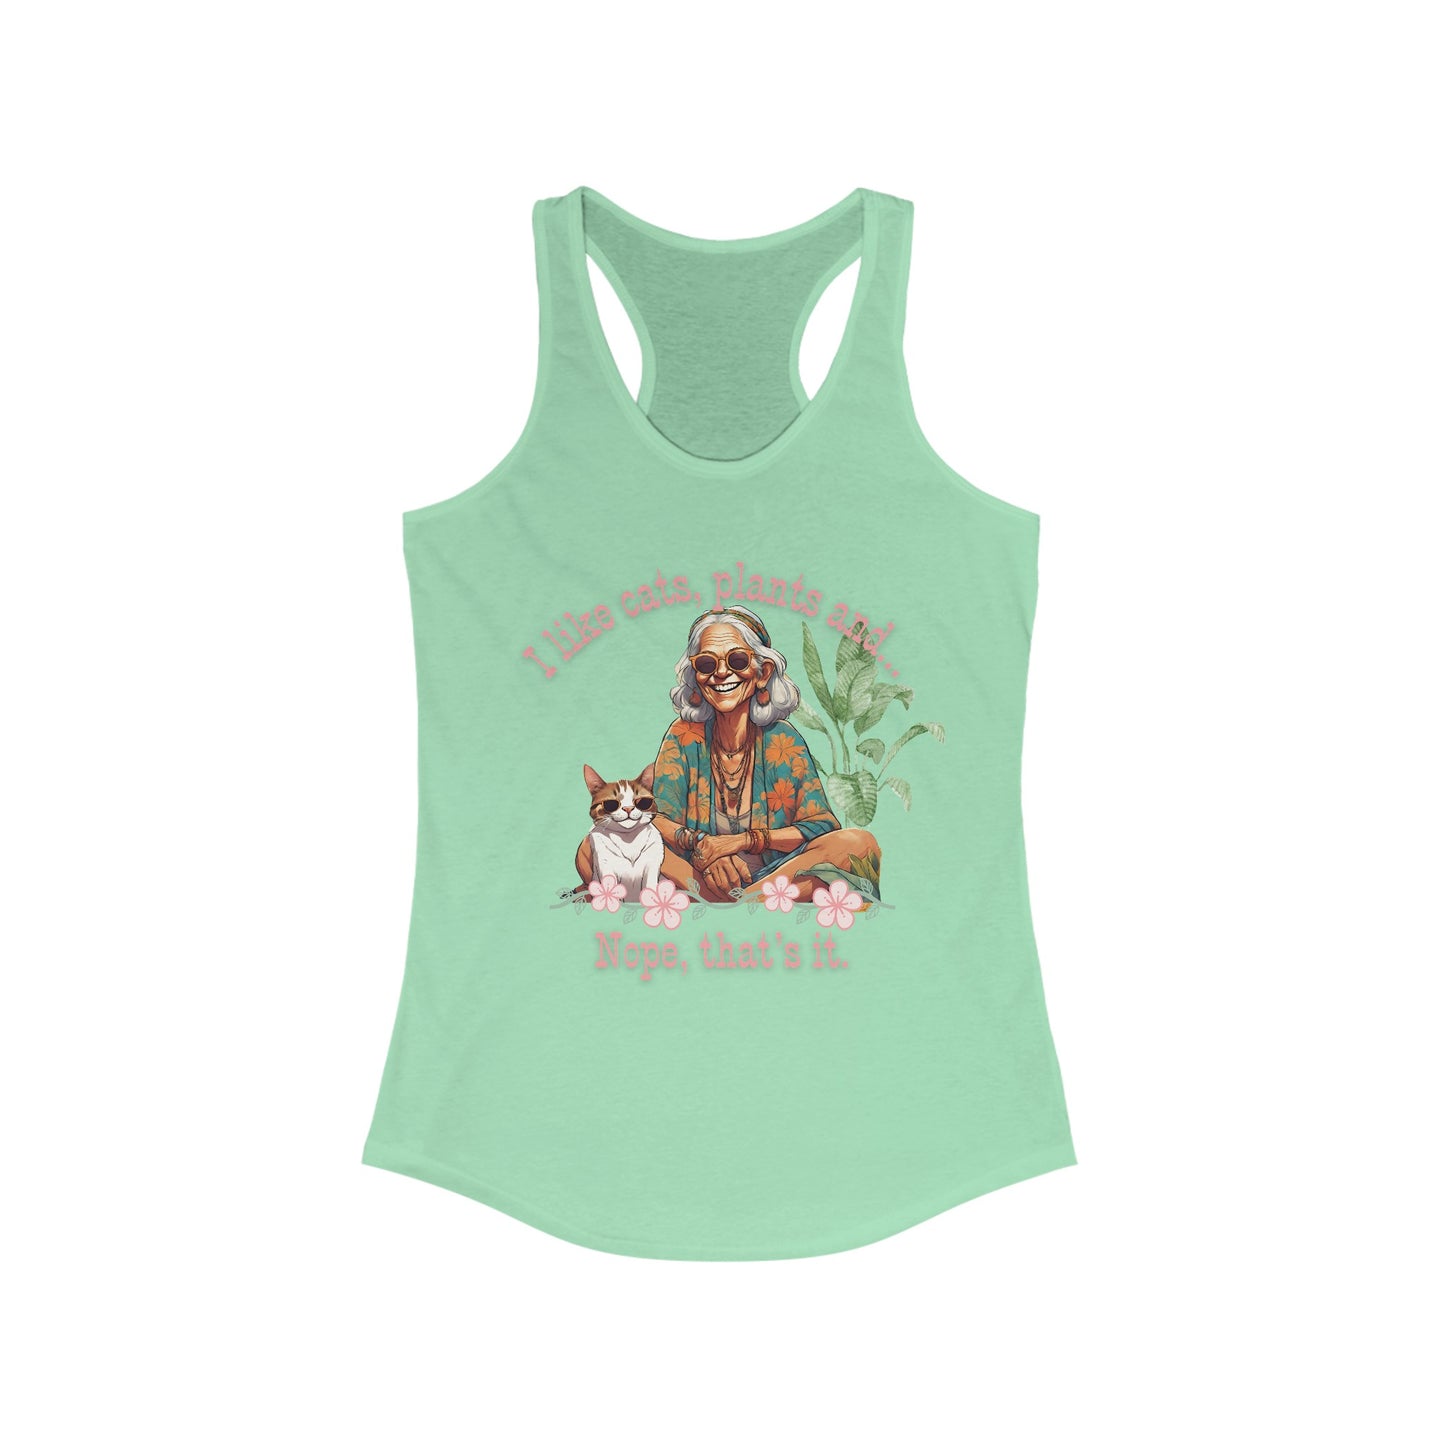 Cat Lady - Cats, plants and... 2 Women's Ideal Racerback Tank